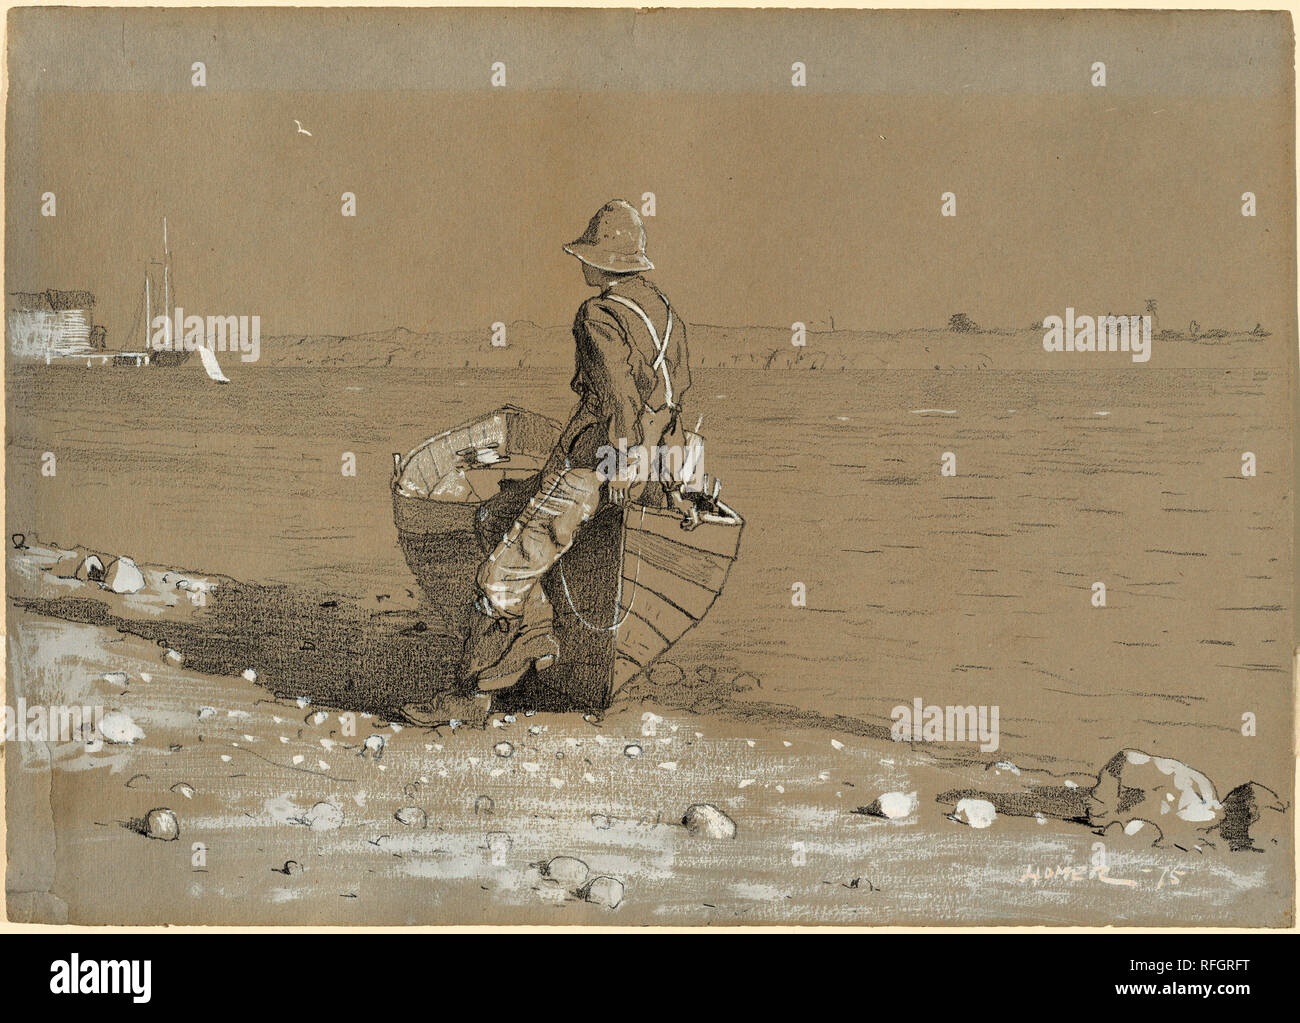 Looking Out. Dated: 1875. Dimensions: sheet: 25.08 × 35.24 cm (9 7/8 × 13 7/8 in.). Medium: graphite and Chinese white on gray wove paper. Museum: National Gallery of Art, Washington DC. Author: Winslow Homer. Stock Photo